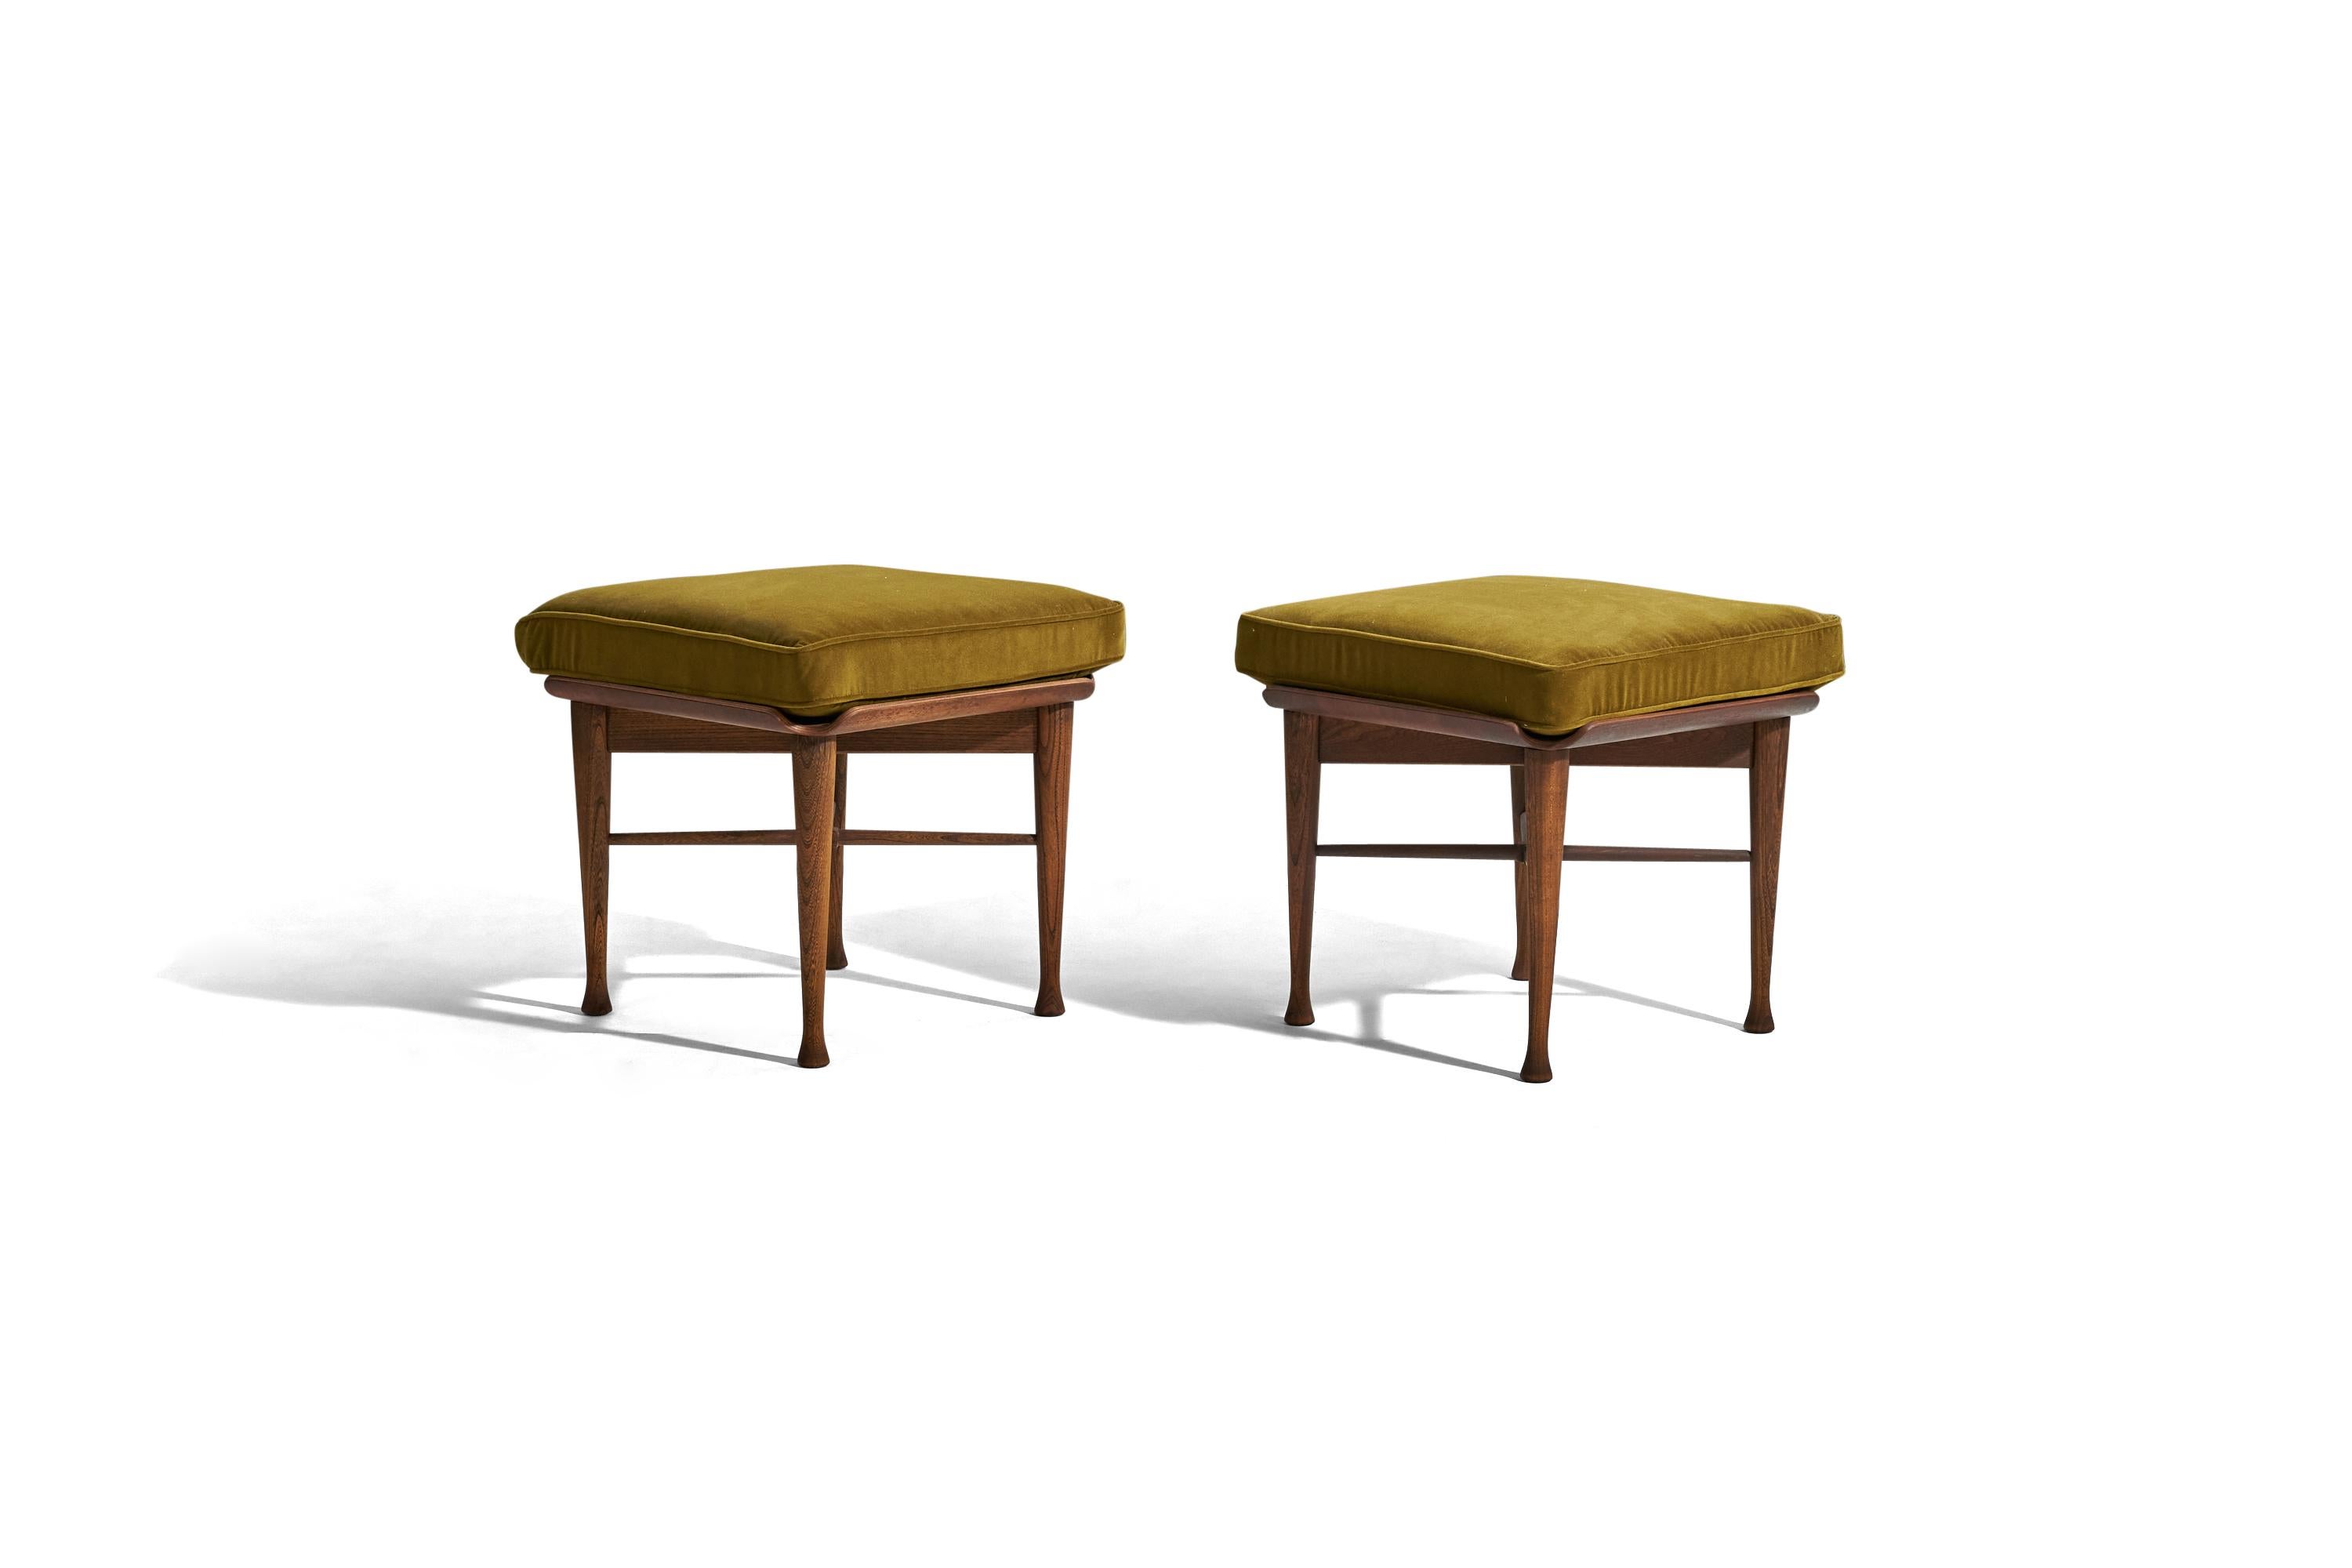 A pair of solid walnut and molded walnut, plywood and fabric stools, designed by Lawrence Peabody for Richardson Nemschoff, United States, 1960s.
 